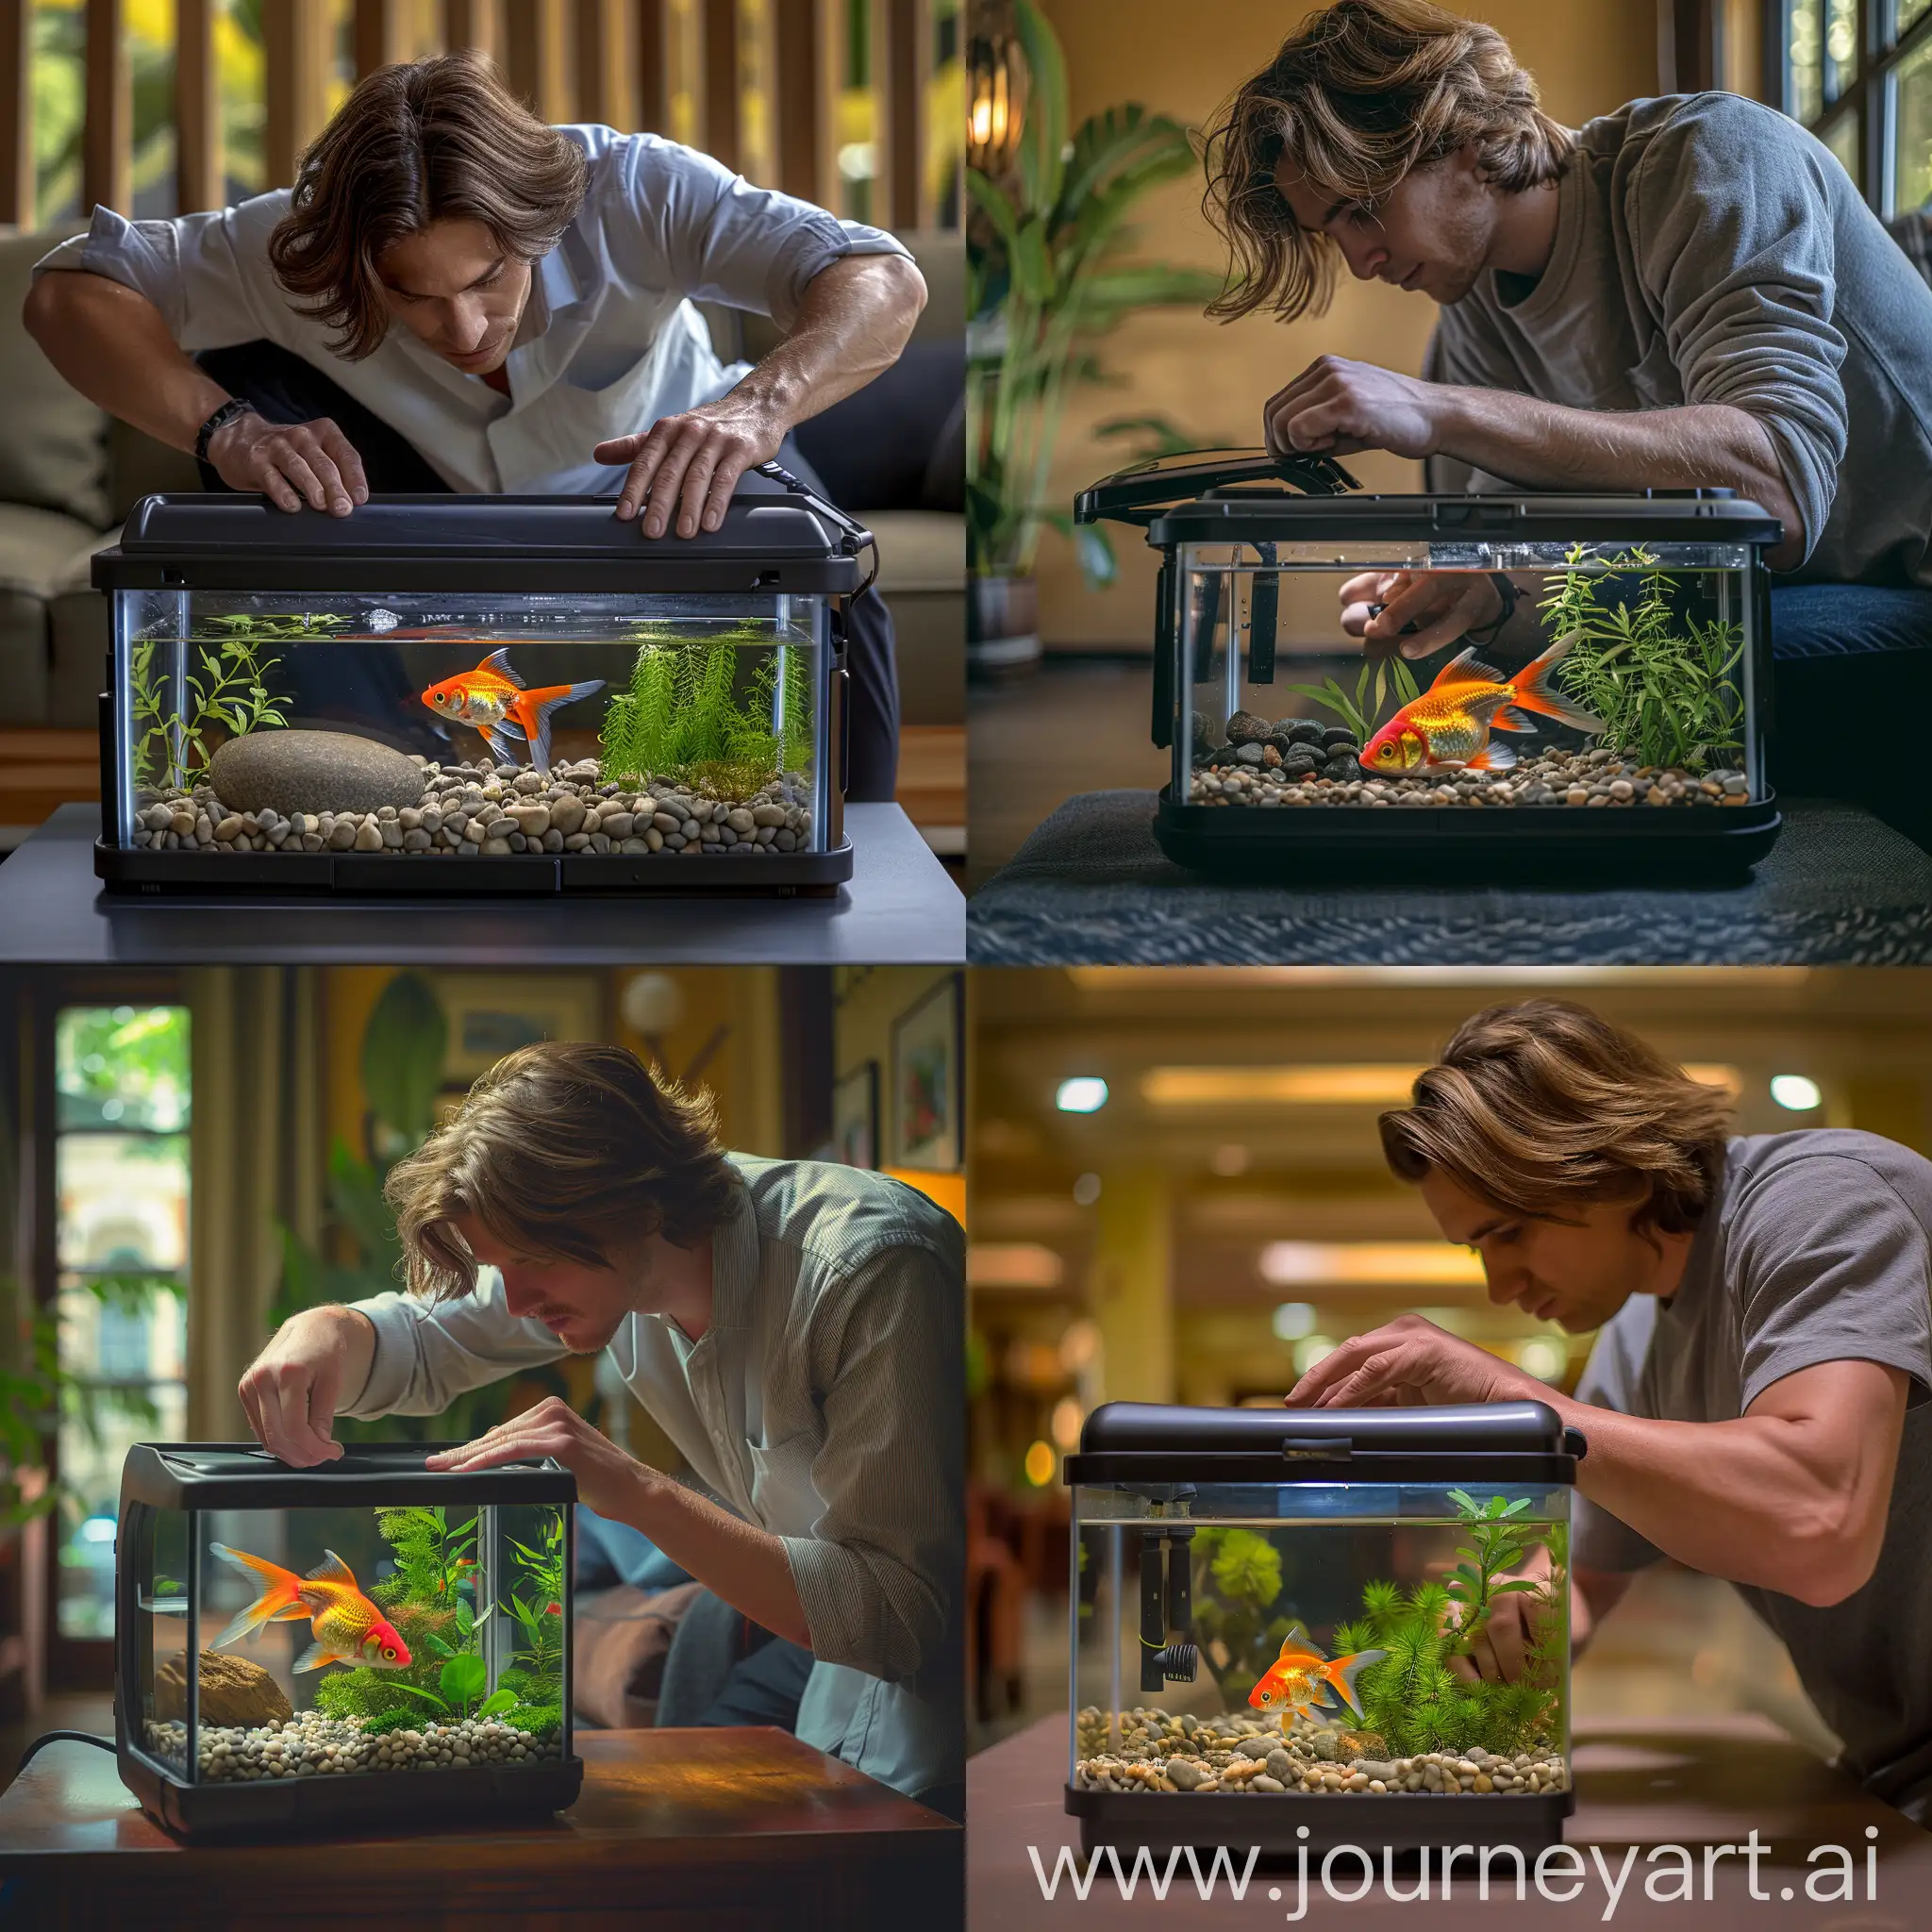 Imagine a scene in a spacious, well-lit room. At the center of the image, there is a man with medium-length hair and casual attire, diligently working on preparing a small portable fish tank. The fish, a vibrant orange goldfish, swims contentedly in the tank, surrounded by aquatic plants and pebbles. The man's hands carefully position the tank's lid, ensuring a secure closure for their trip to the park. Serene atmosphere, concentration on the task, attention to detail, comfortable setting, preparing for a journey, Canon 5D Mark IV, 24-70mm lens, f2.8